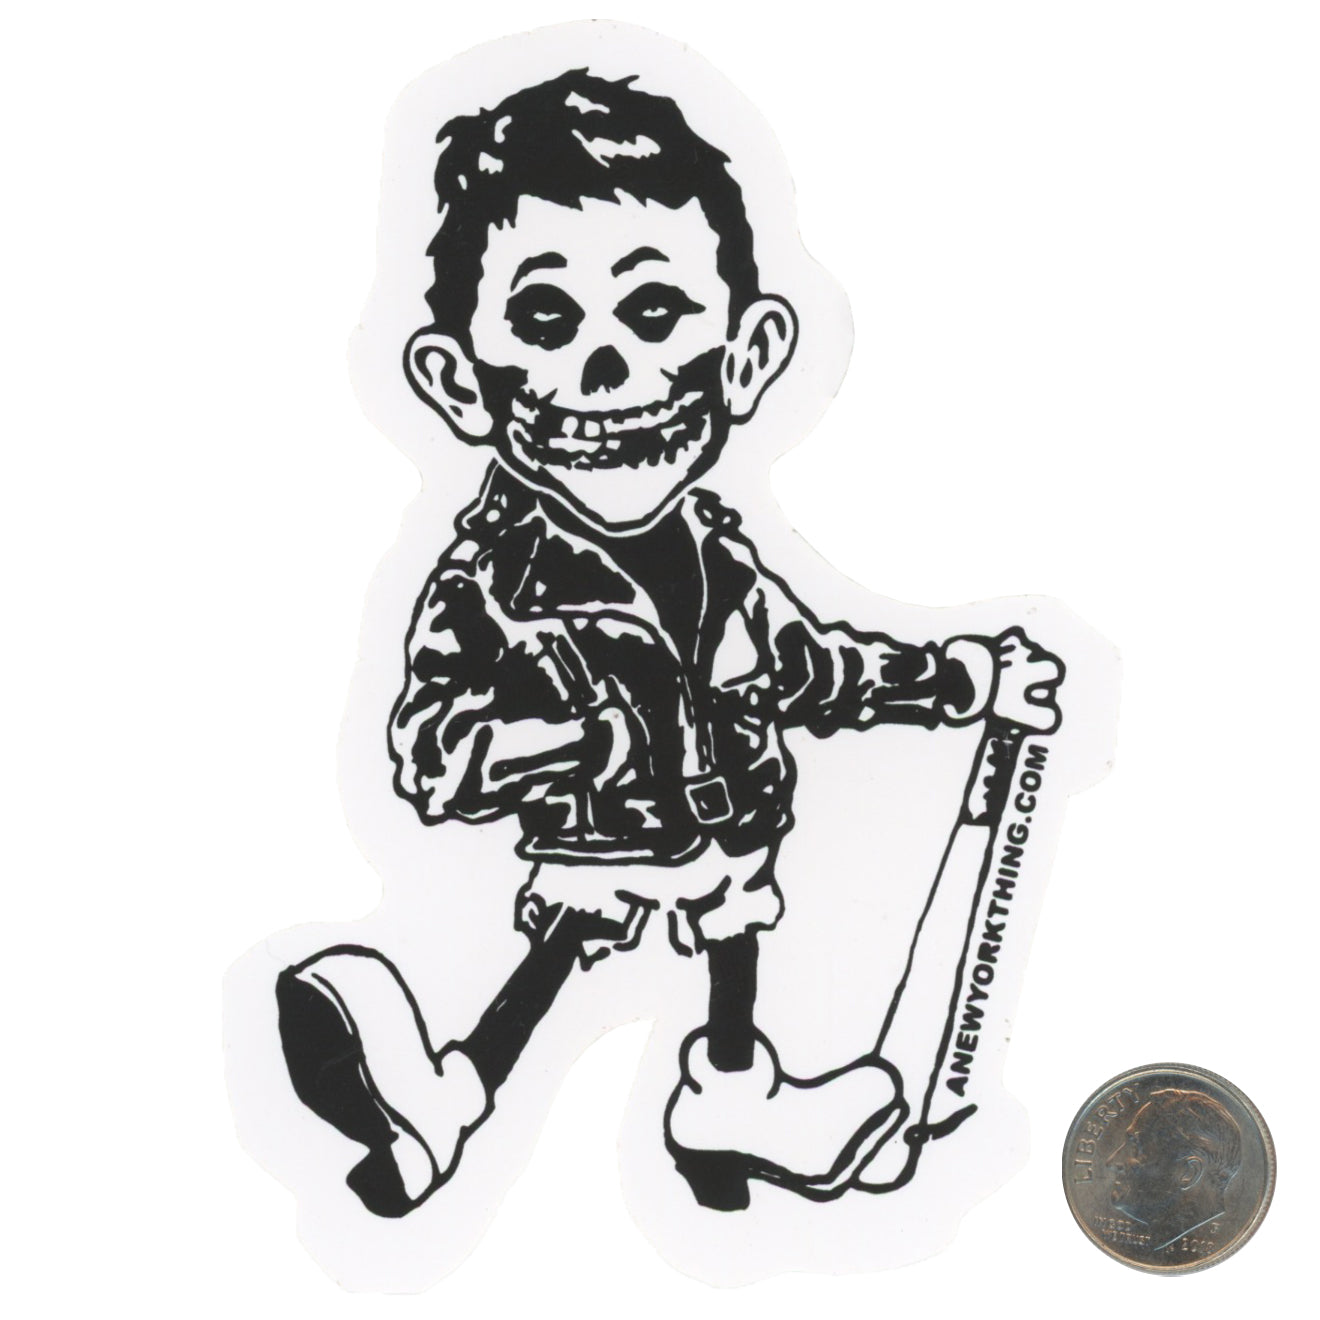 Anything Alfred E. Newman Baseball Player Sticker with dime